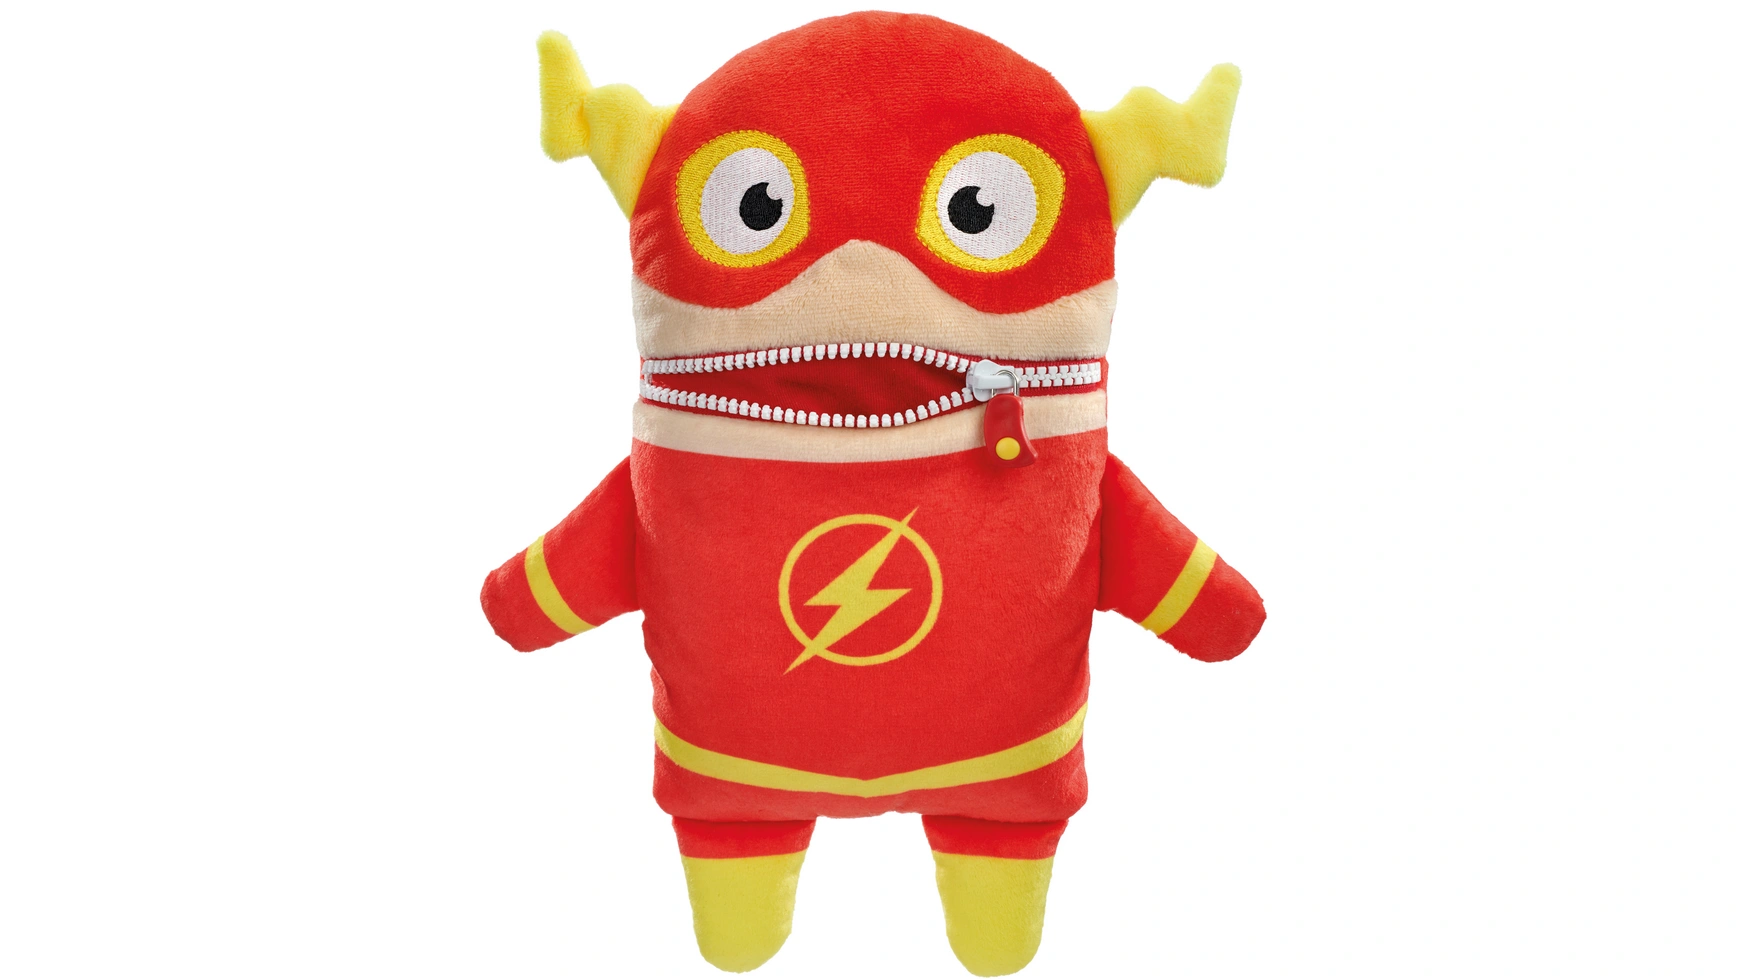 Schmidt Spiele Worry Eater DC Super Hero: Worry Eater, The Flash, 29 см светильник dc the flash 3d character